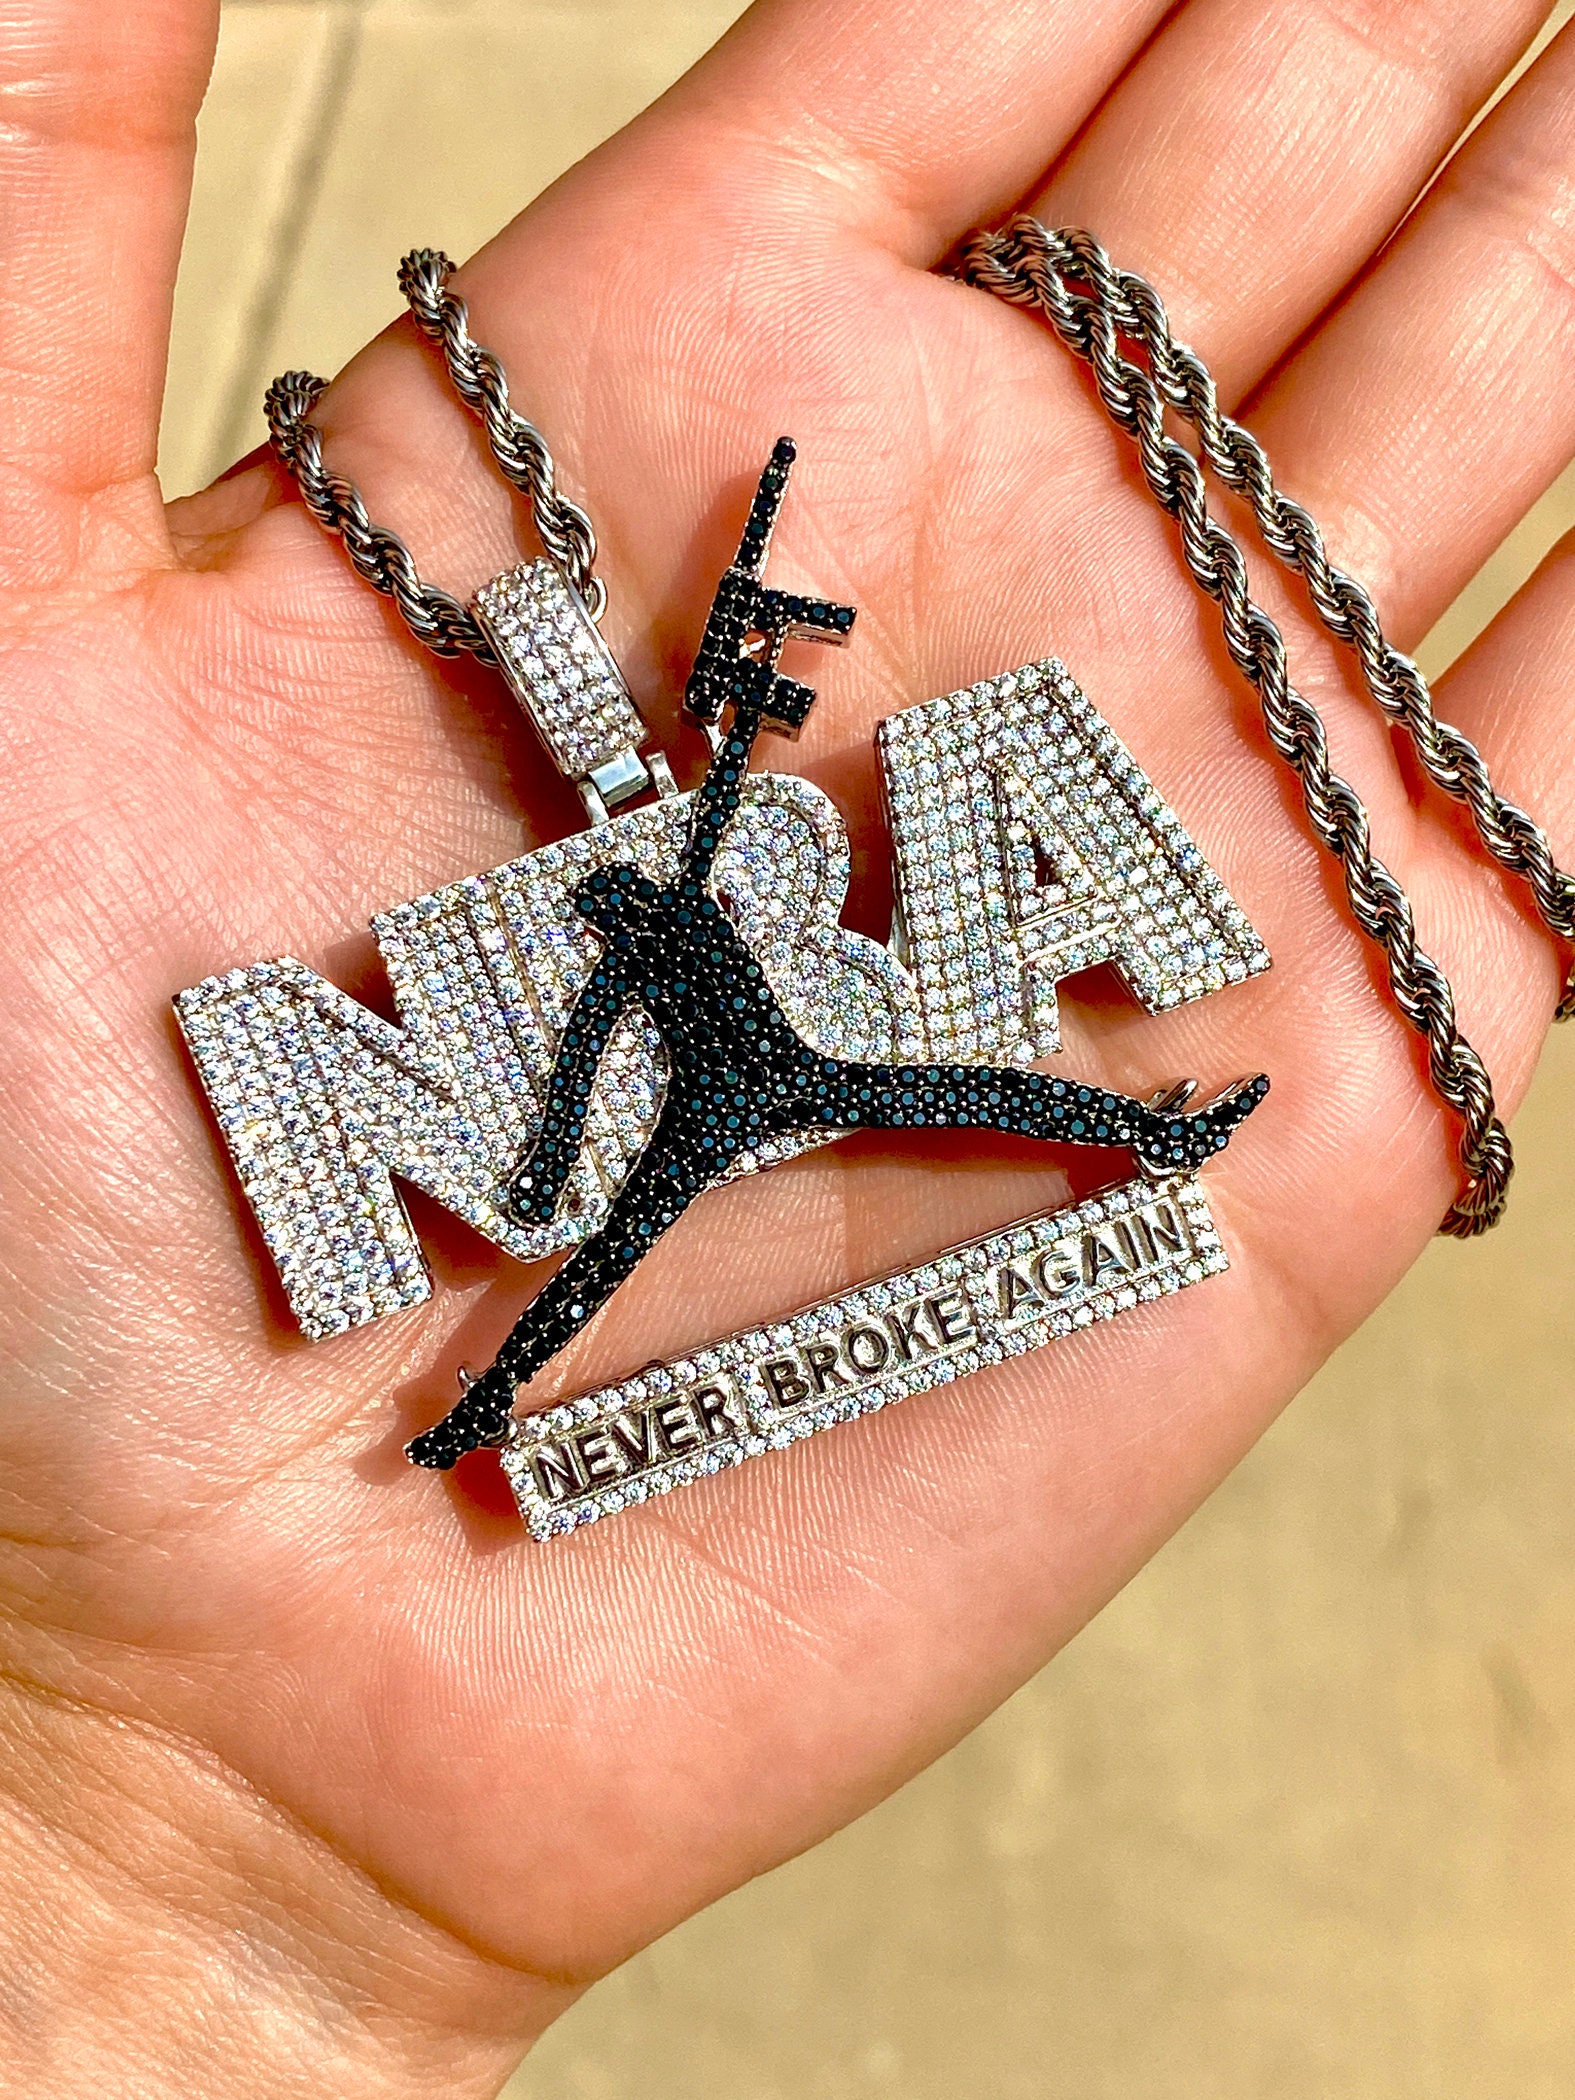 NBAYoungboy 's new two tone, fully flooded, reversible Heart Pendant with  with a unique custom lock clasp paired with a two tone infinity link chain  💎, By Shyne Jewelers